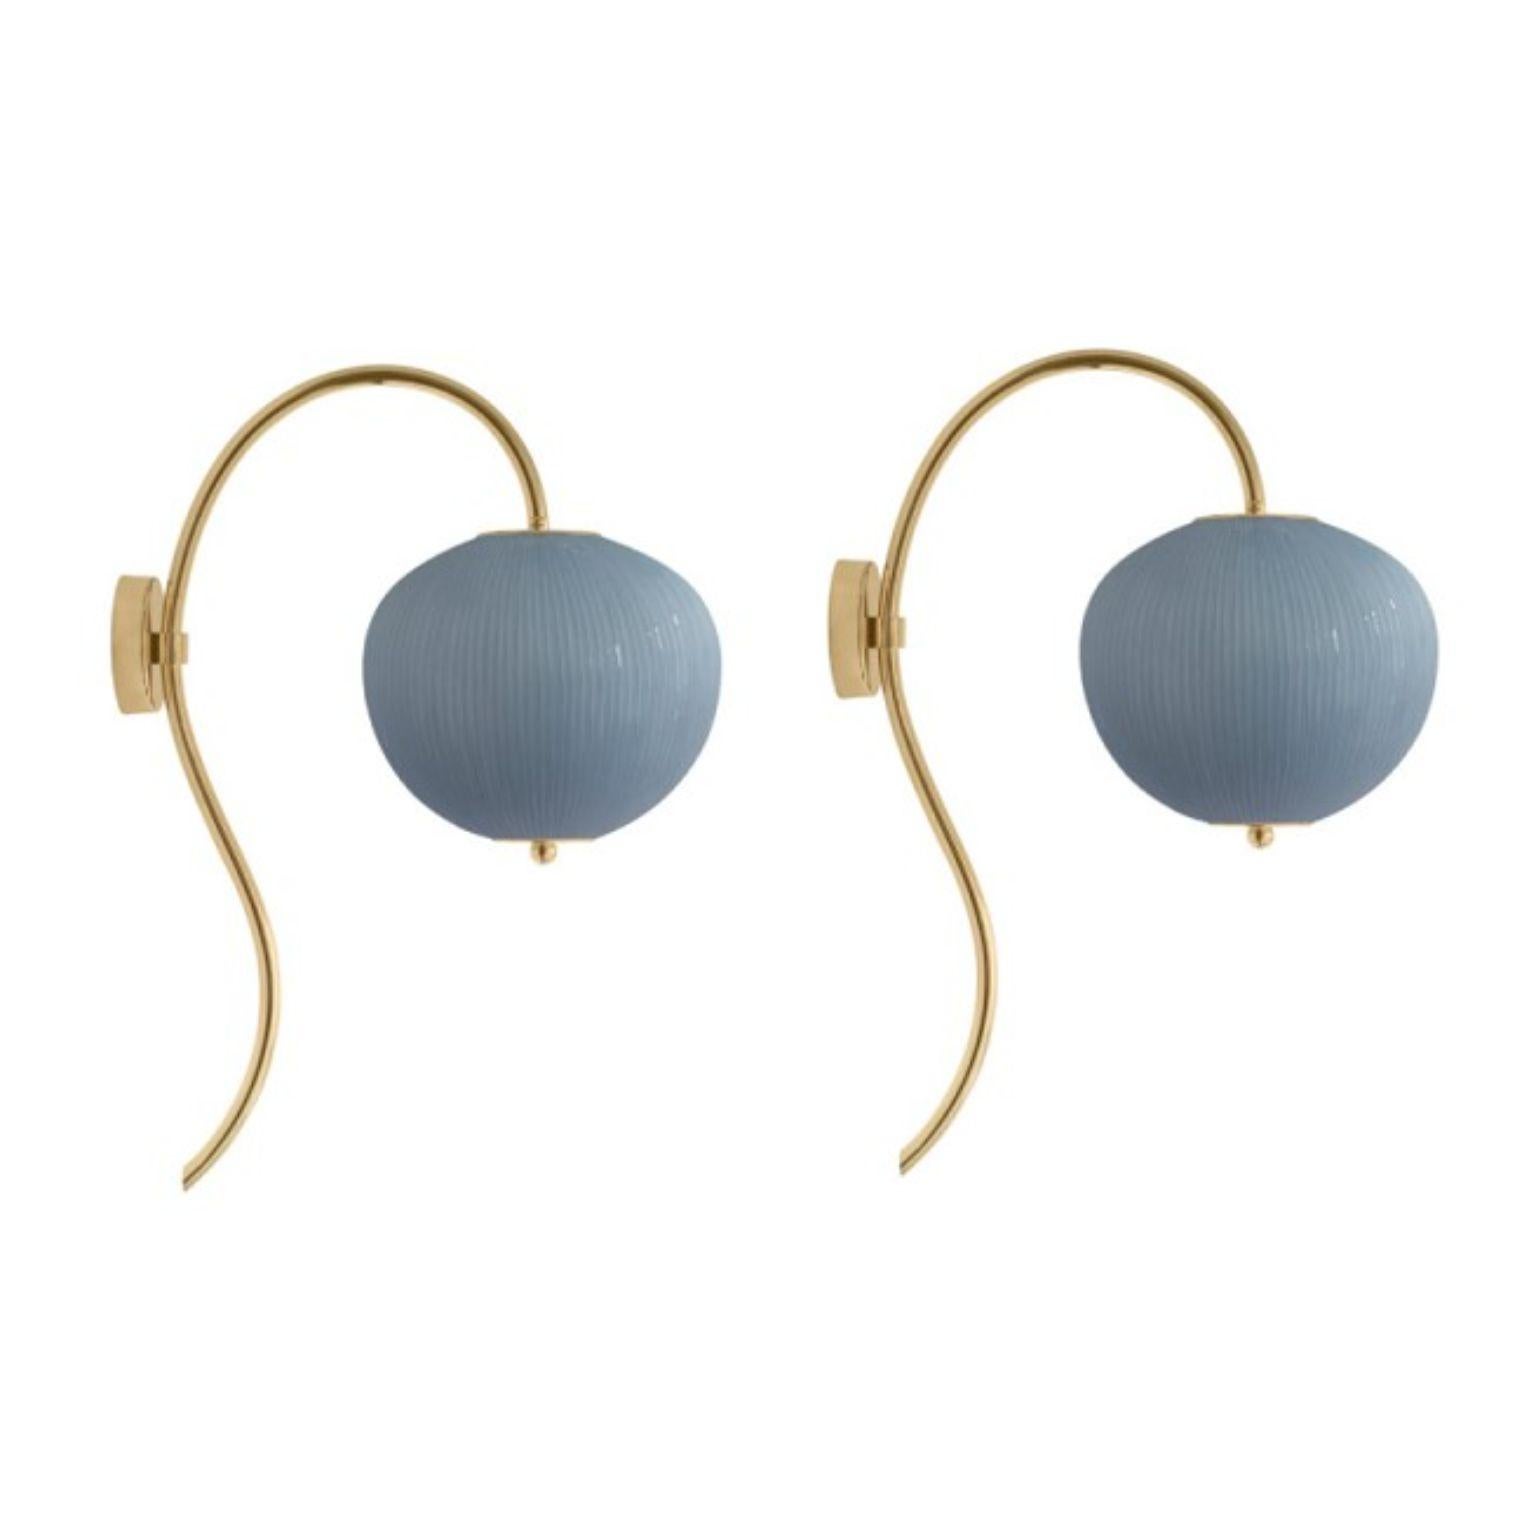 Wall lamp china 03 by Magic Circus Editions
Dimensions: H 62 x W 26.2 x D 41.5 cm
Materials: Brass, mouth blown glass sculpted with a diamond saw
Colour: opal grey

Available finishes: Brass, nickel
Available colours: enamel soft white, soft rose,